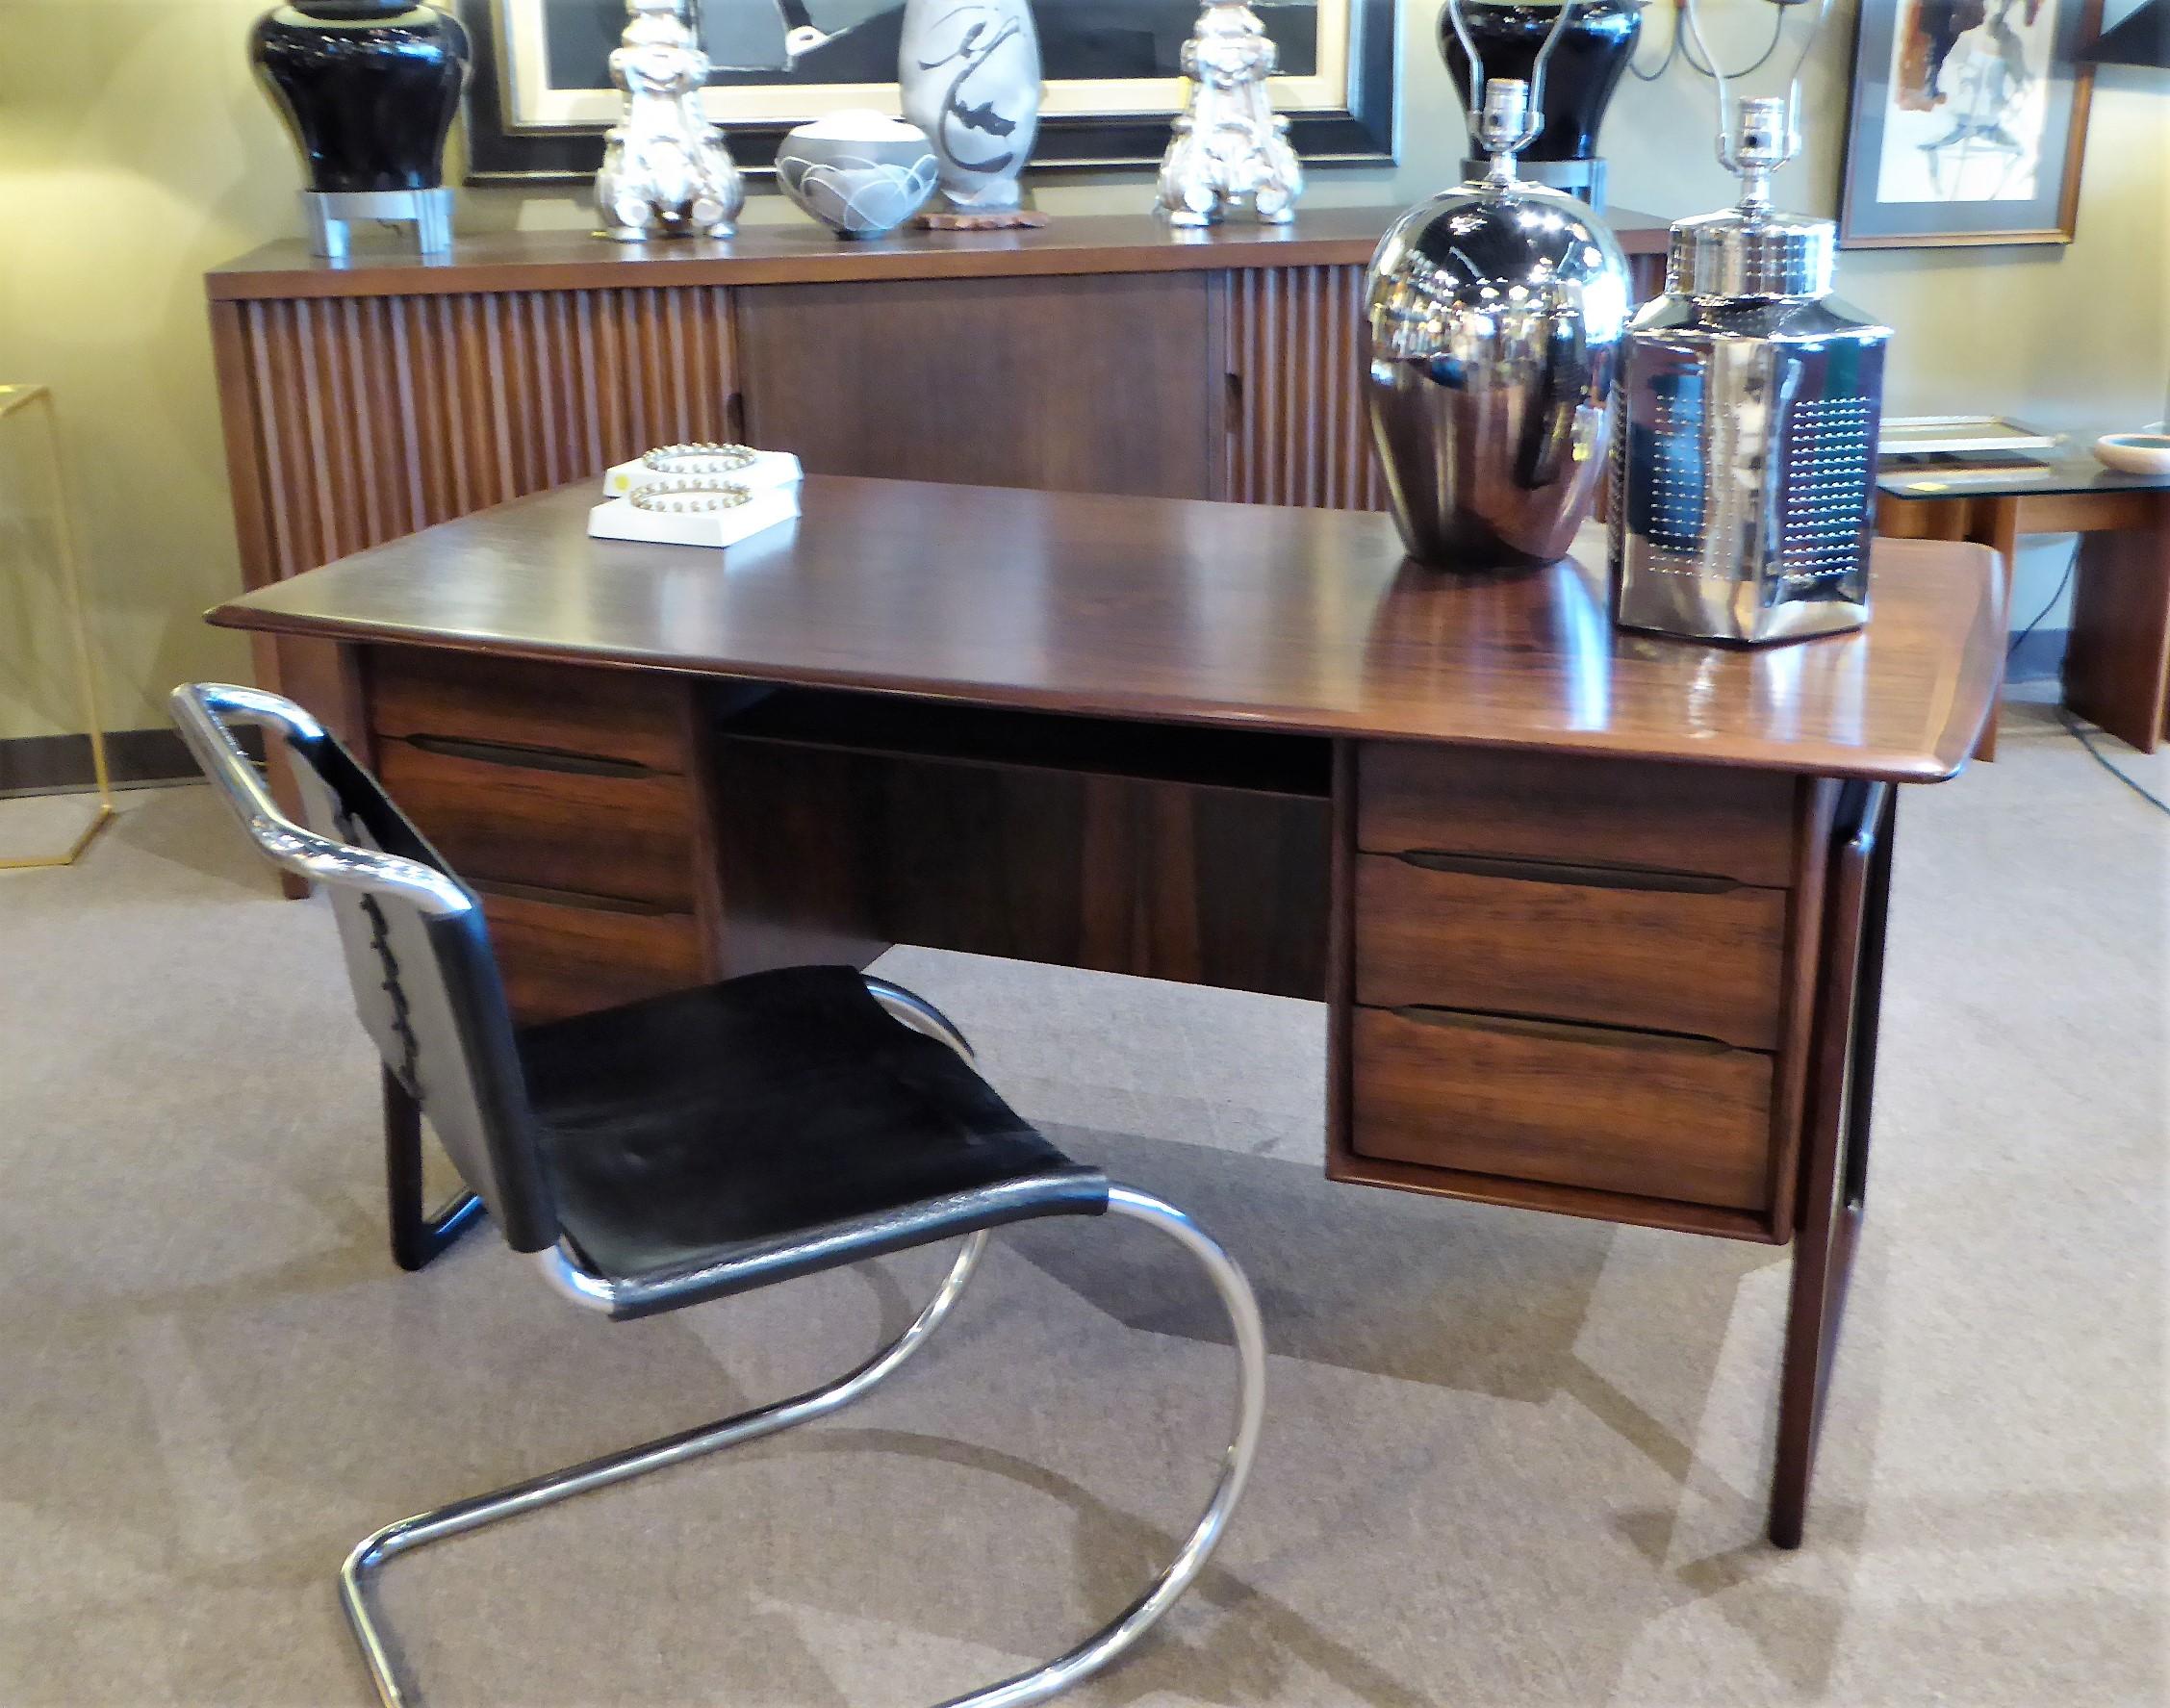 Fine and beautiful rosewood desk designed by Svend Aage Madsen in Denmark. With a floating style top over three drawers left and right and a pass through shelf, front to back. The back side with a deep shelf for books or whatnot. Supported on